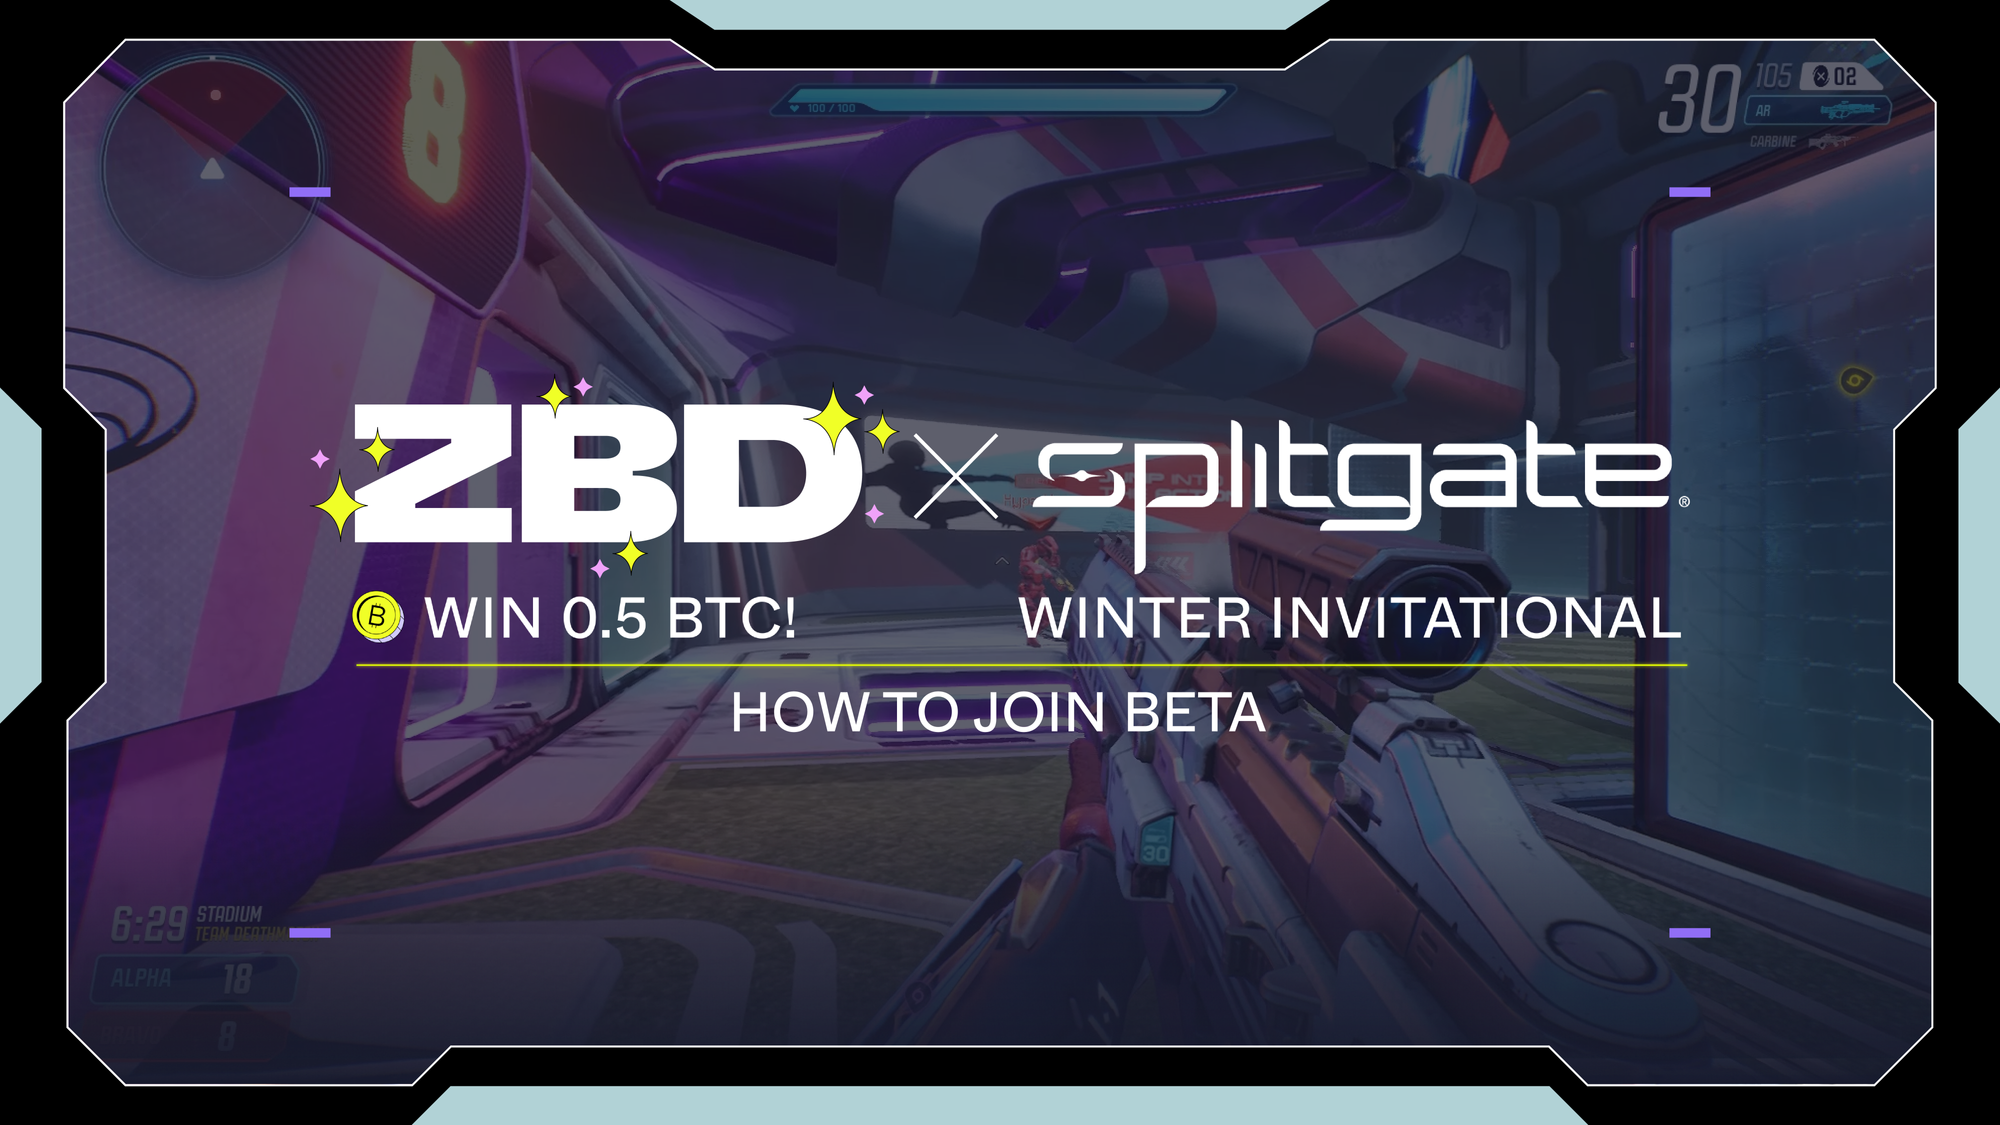 How to Join the ZBD x Splitgate Infuse Beta